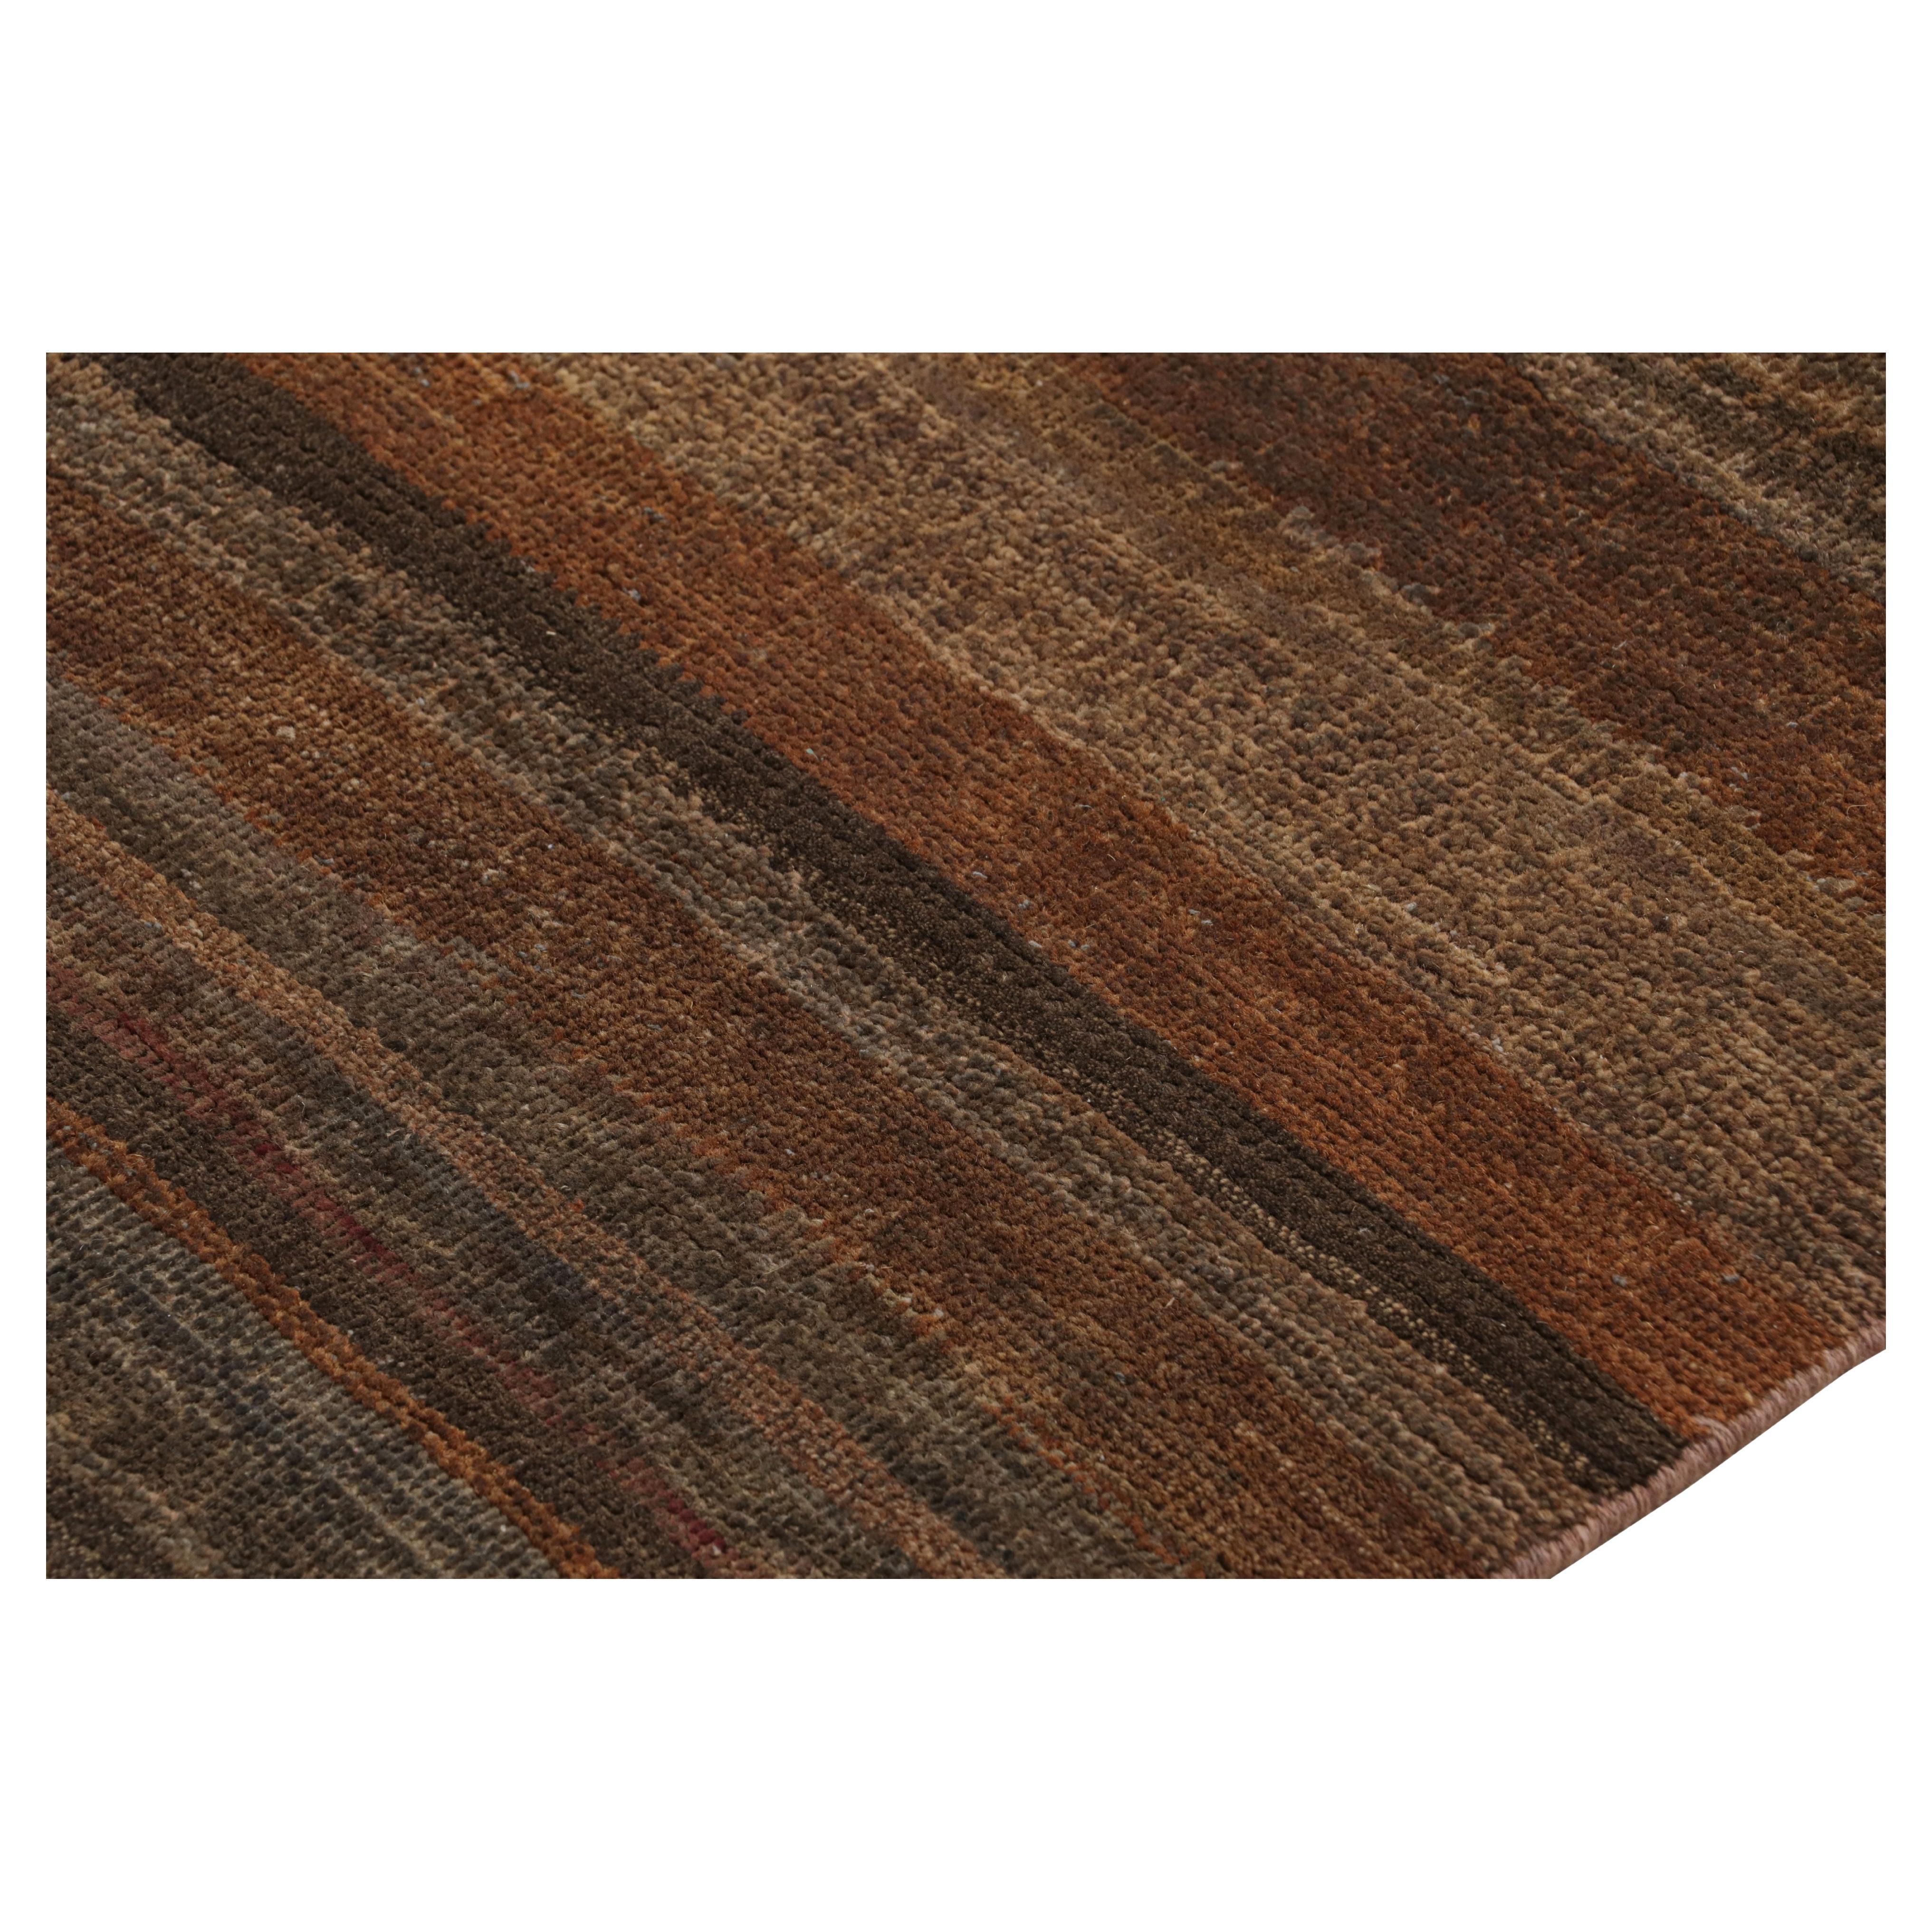 Rug & Kilim’s Modern Textural Rug in Beige-Brown and Umber Stripes and Striae For Sale